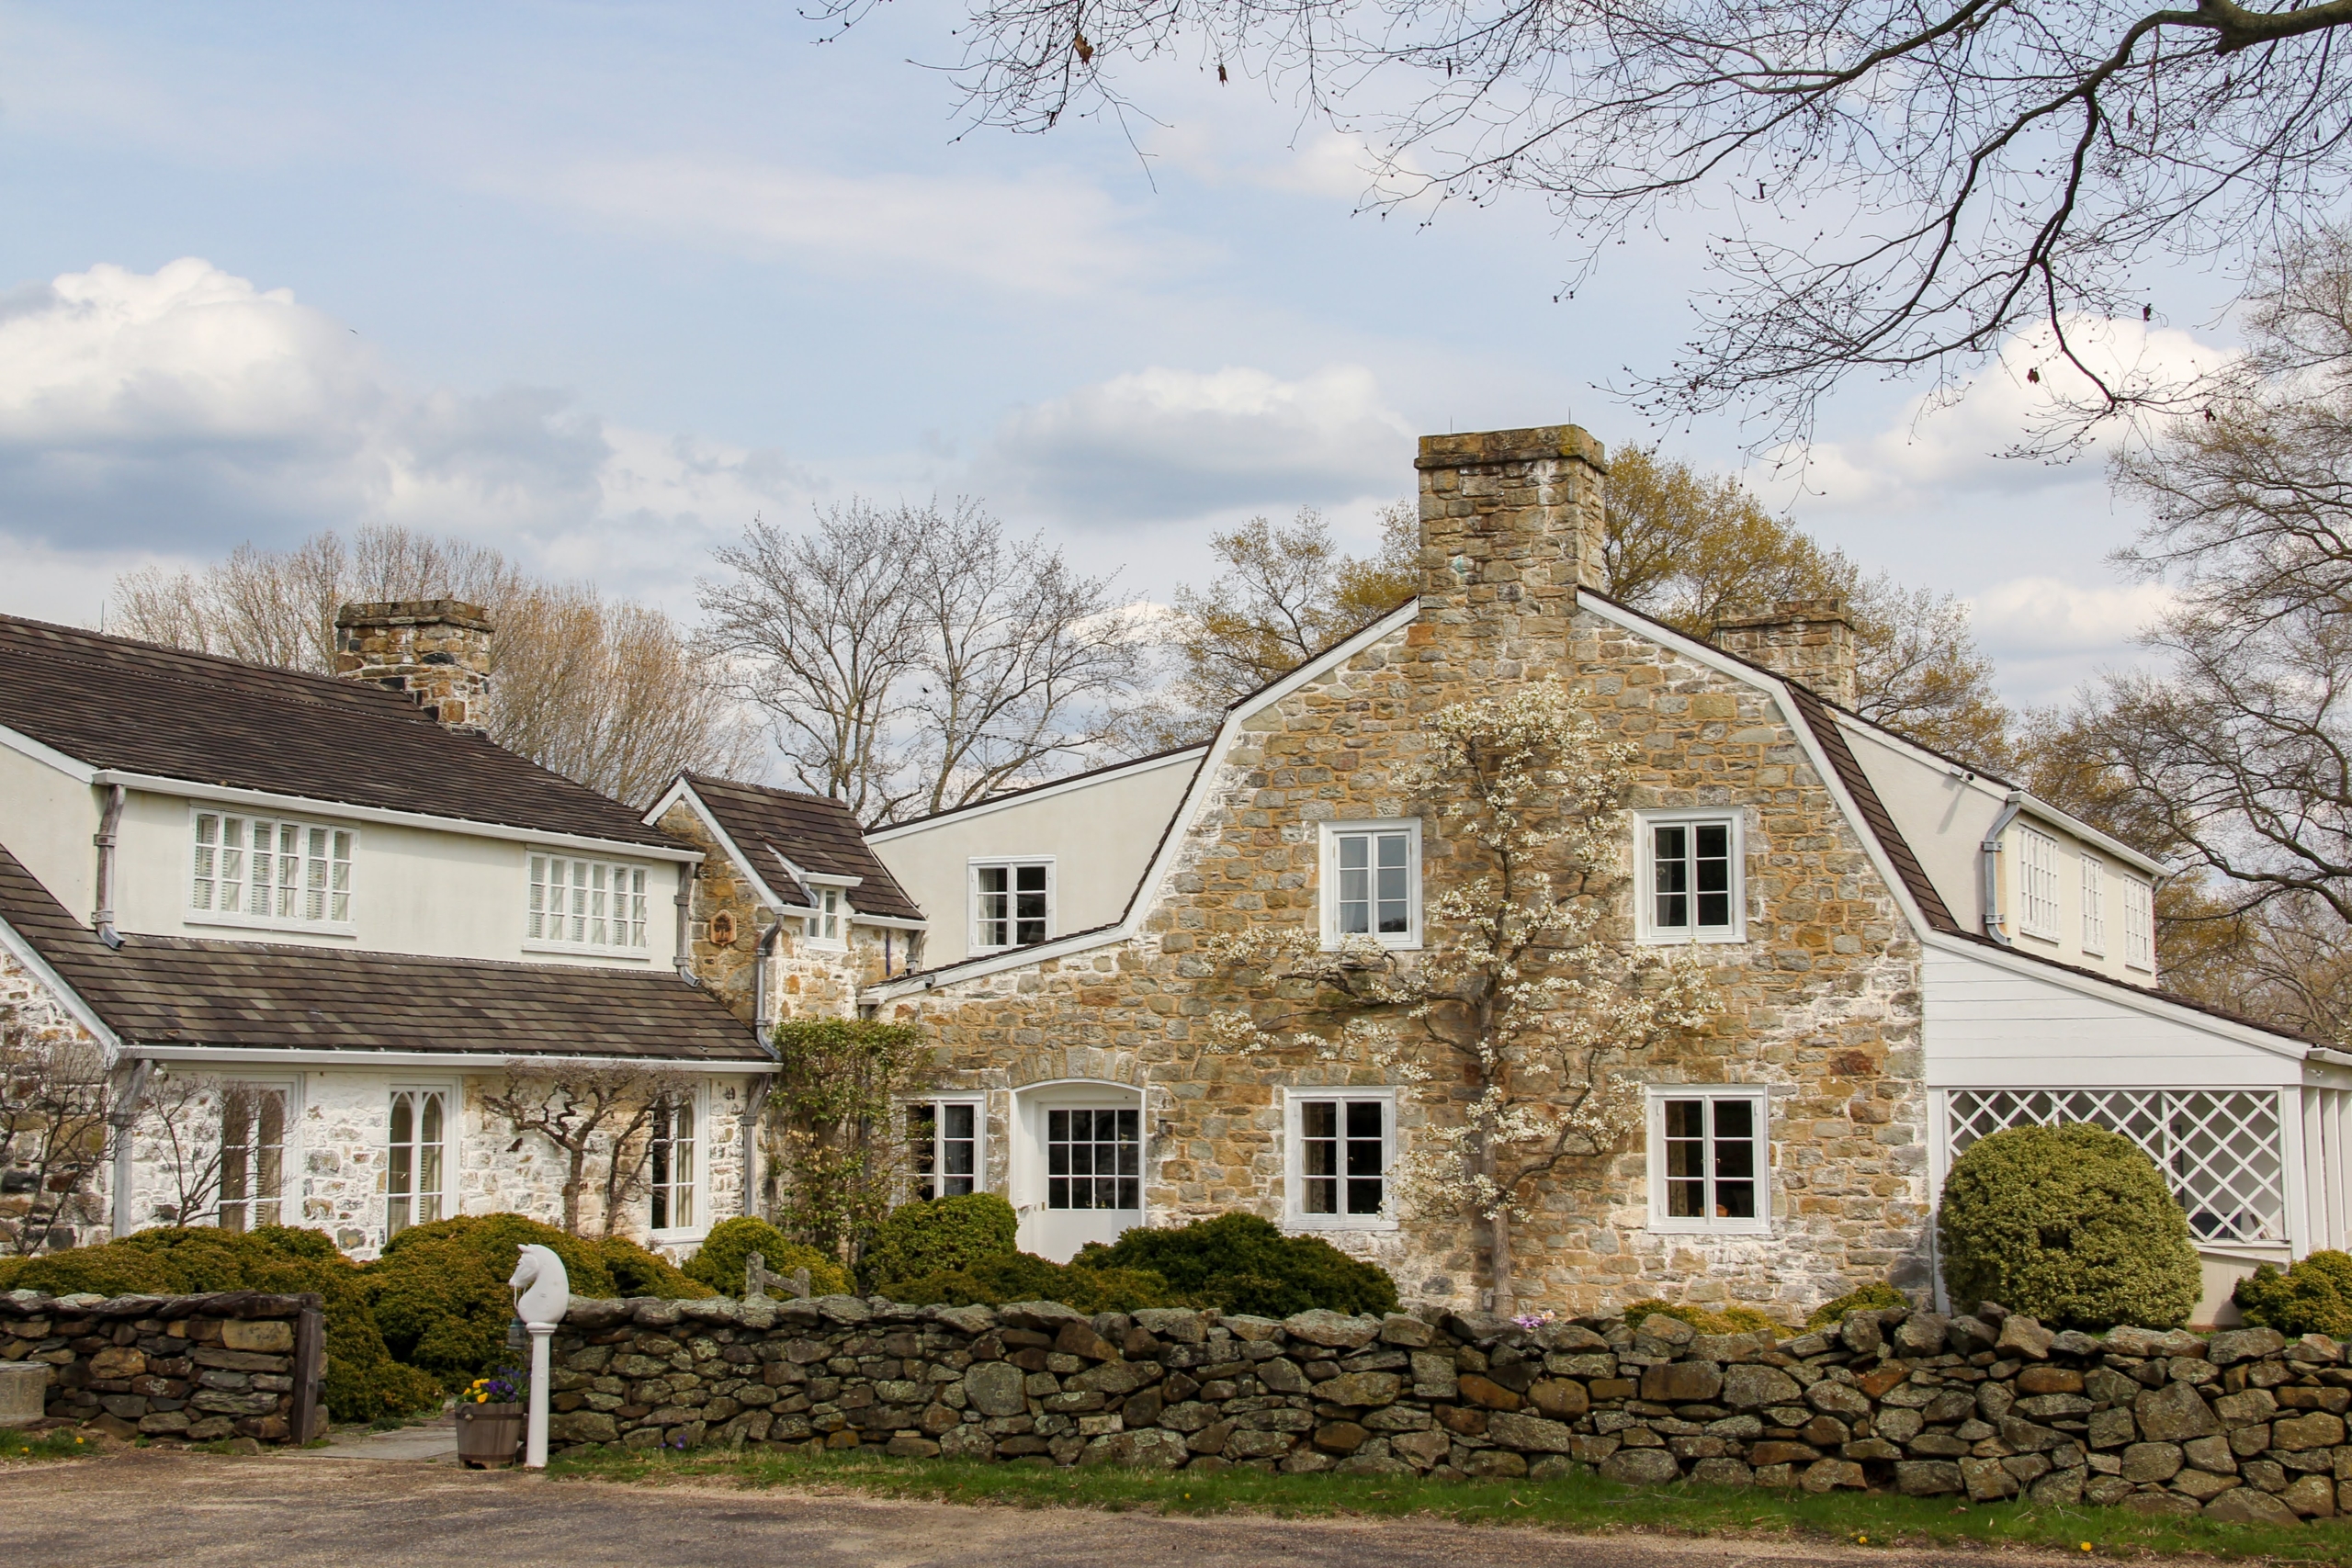 Visiting the Former Estate of Paul and Bunny Mellon in Upperville